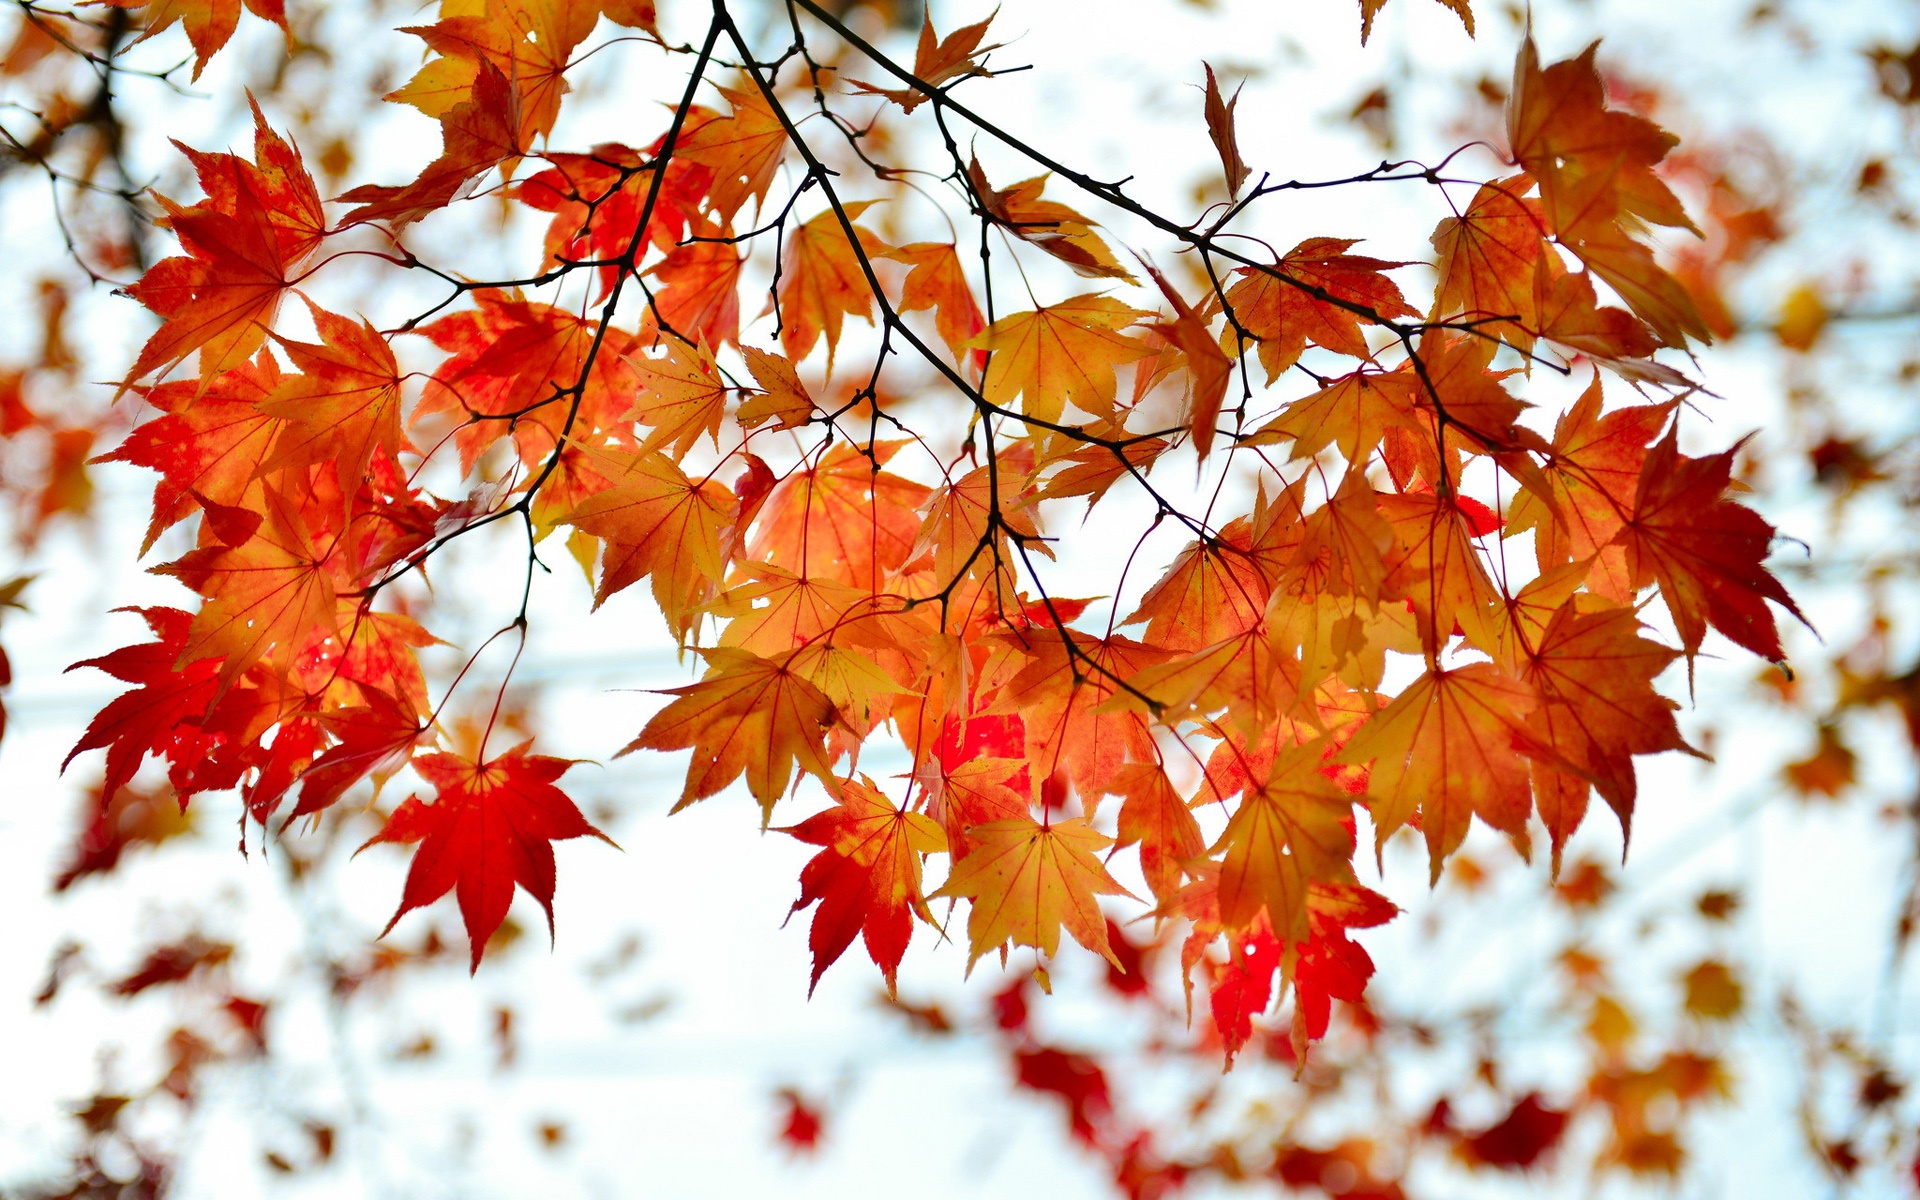 Autumn branch red maple leaves wallpaper 1920x1200.